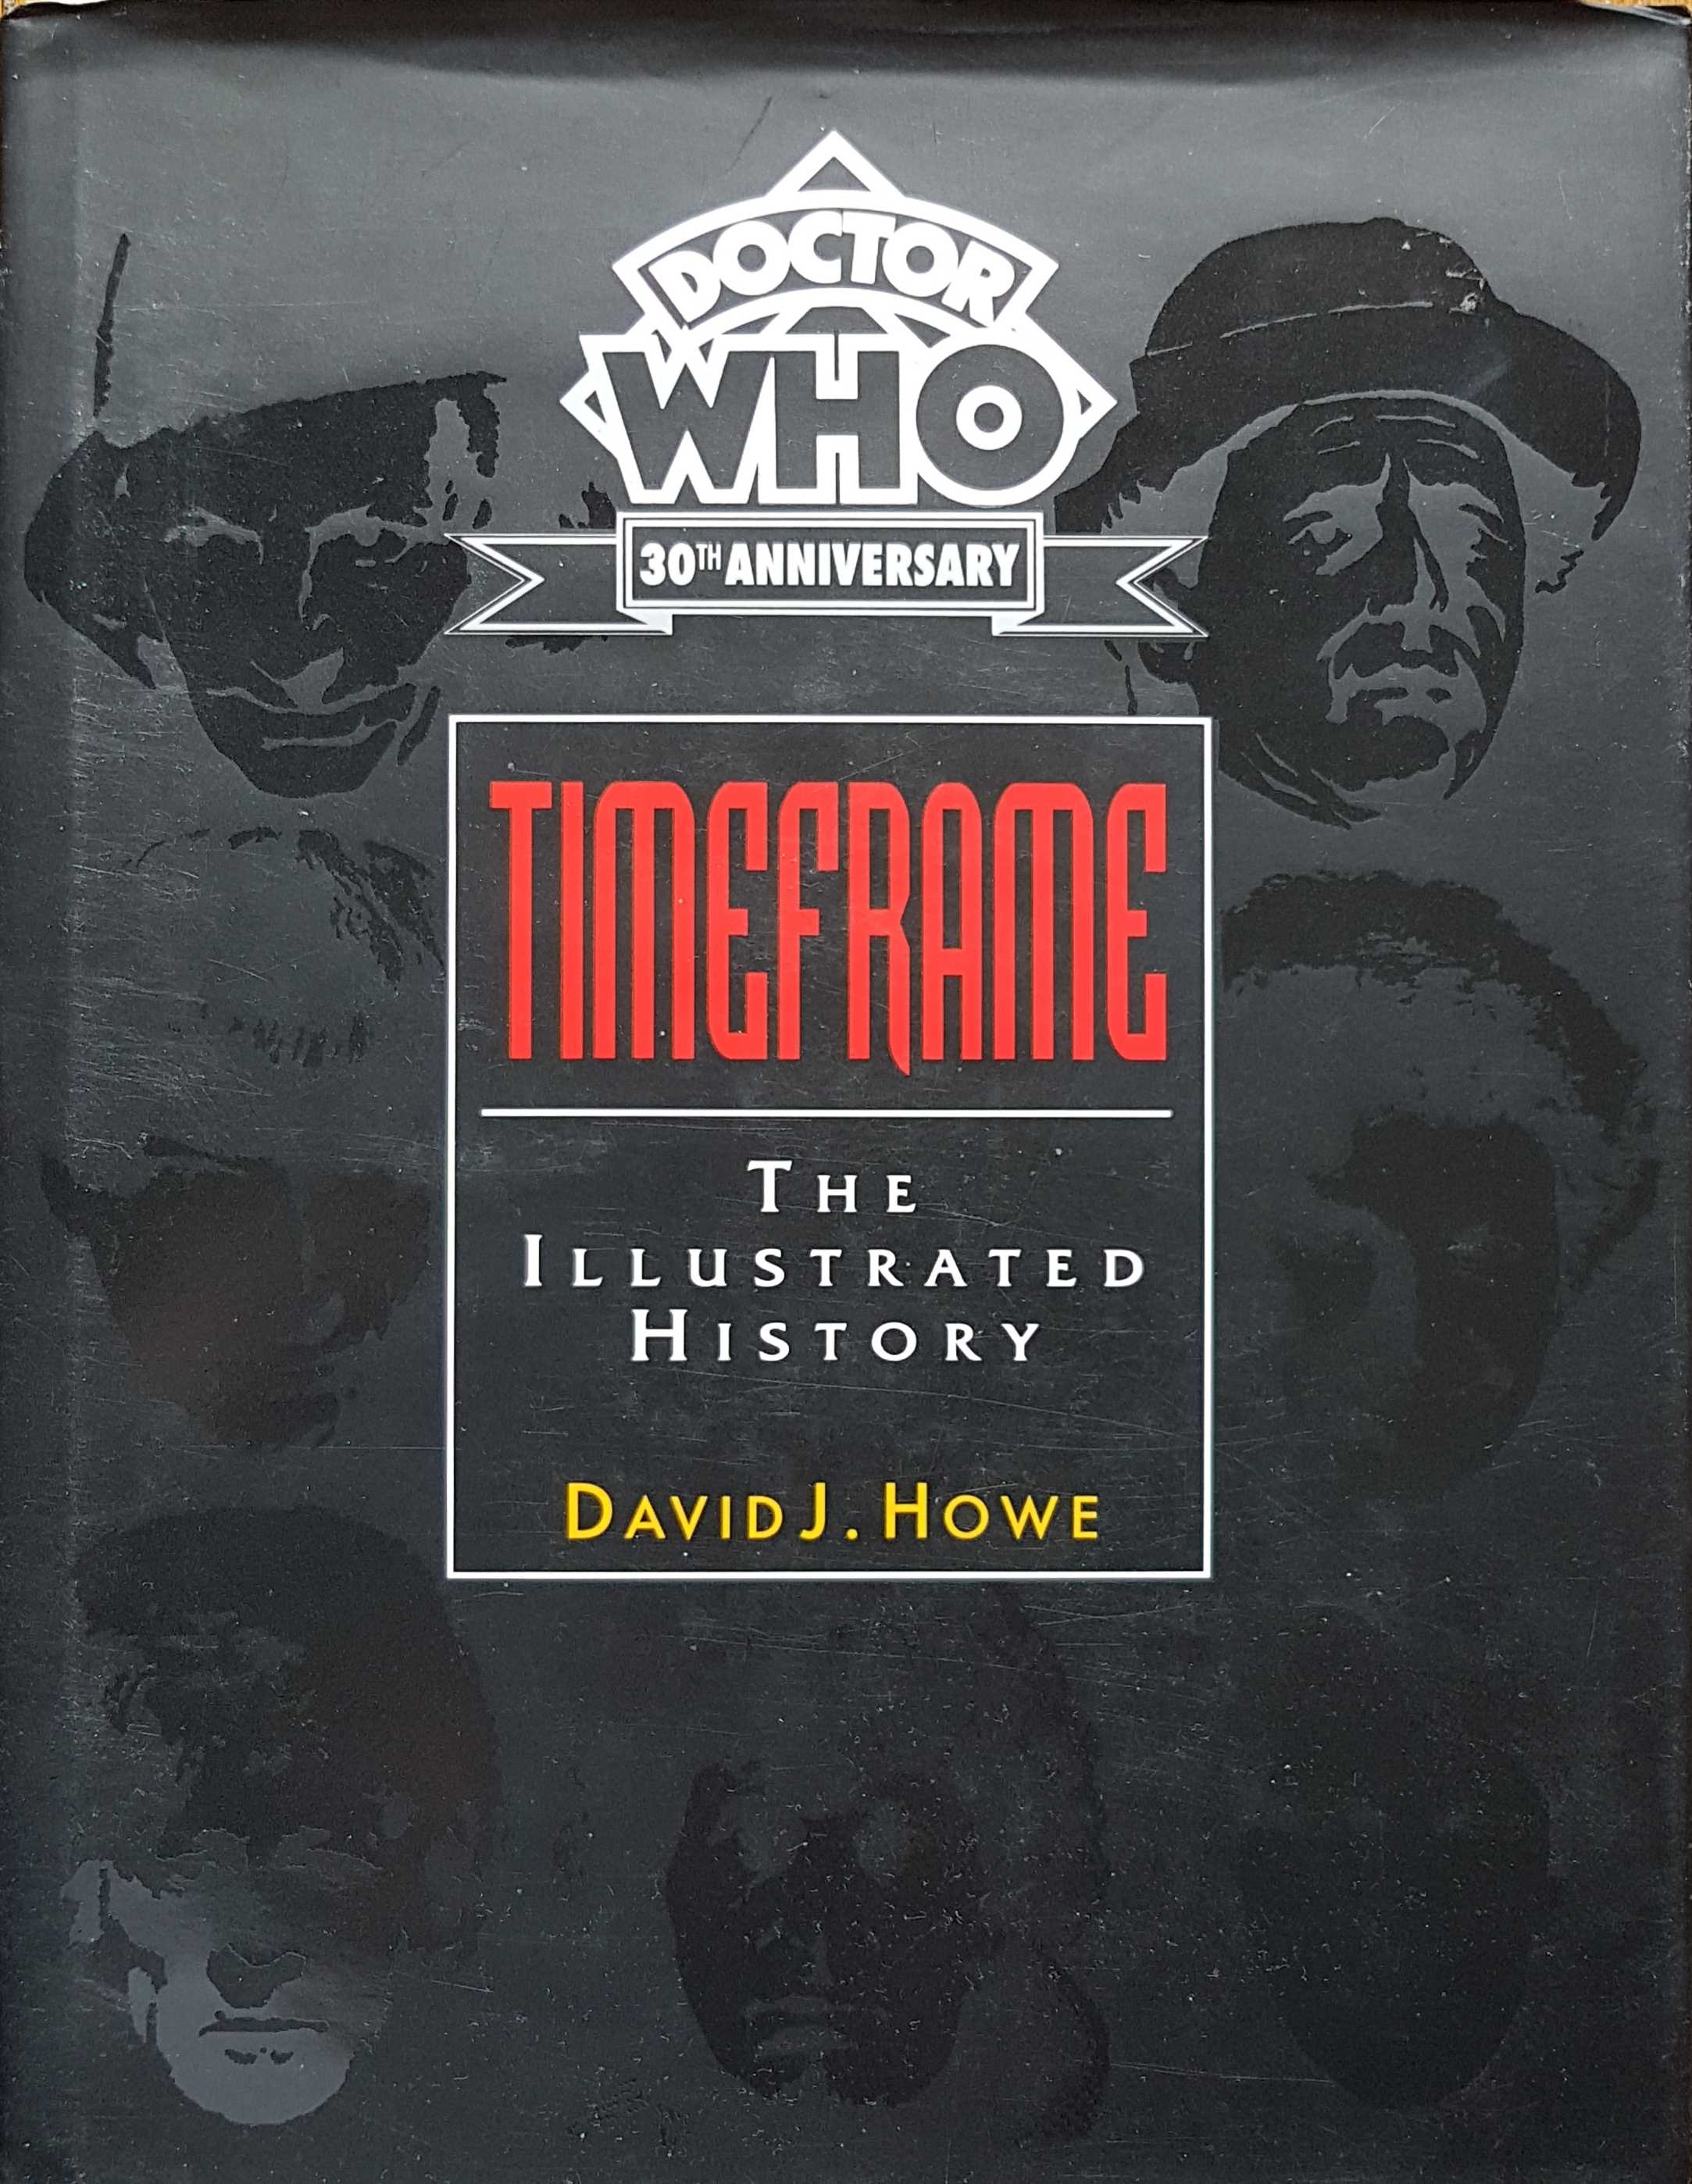 Picture of 1-85227-427-1 Doctor Who - 30th anniversary timeframe by artist David J. Howe from the BBC records and Tapes library